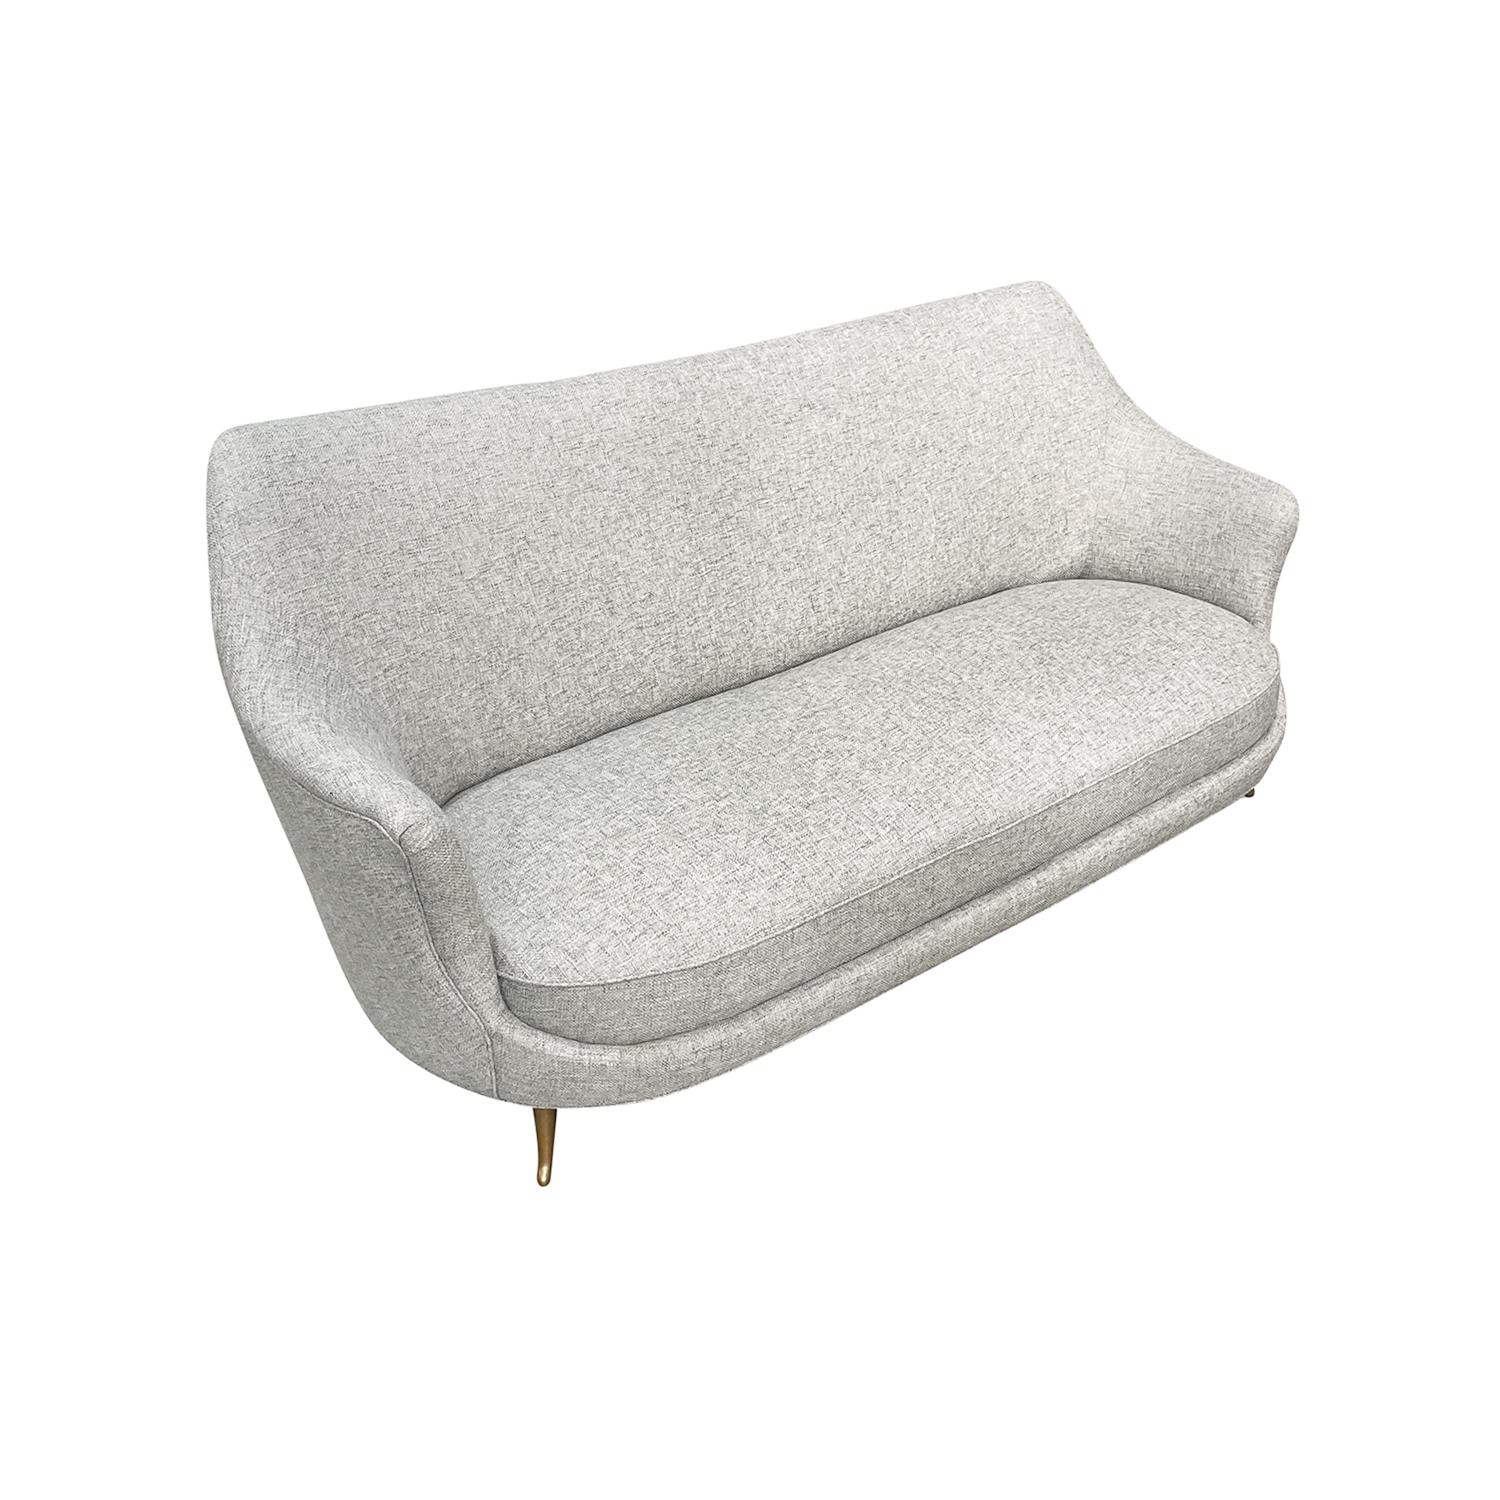 20th Century Grey Italian Two Seater Sofa, Vintage Canapé by ISA Bergamo For Sale 1